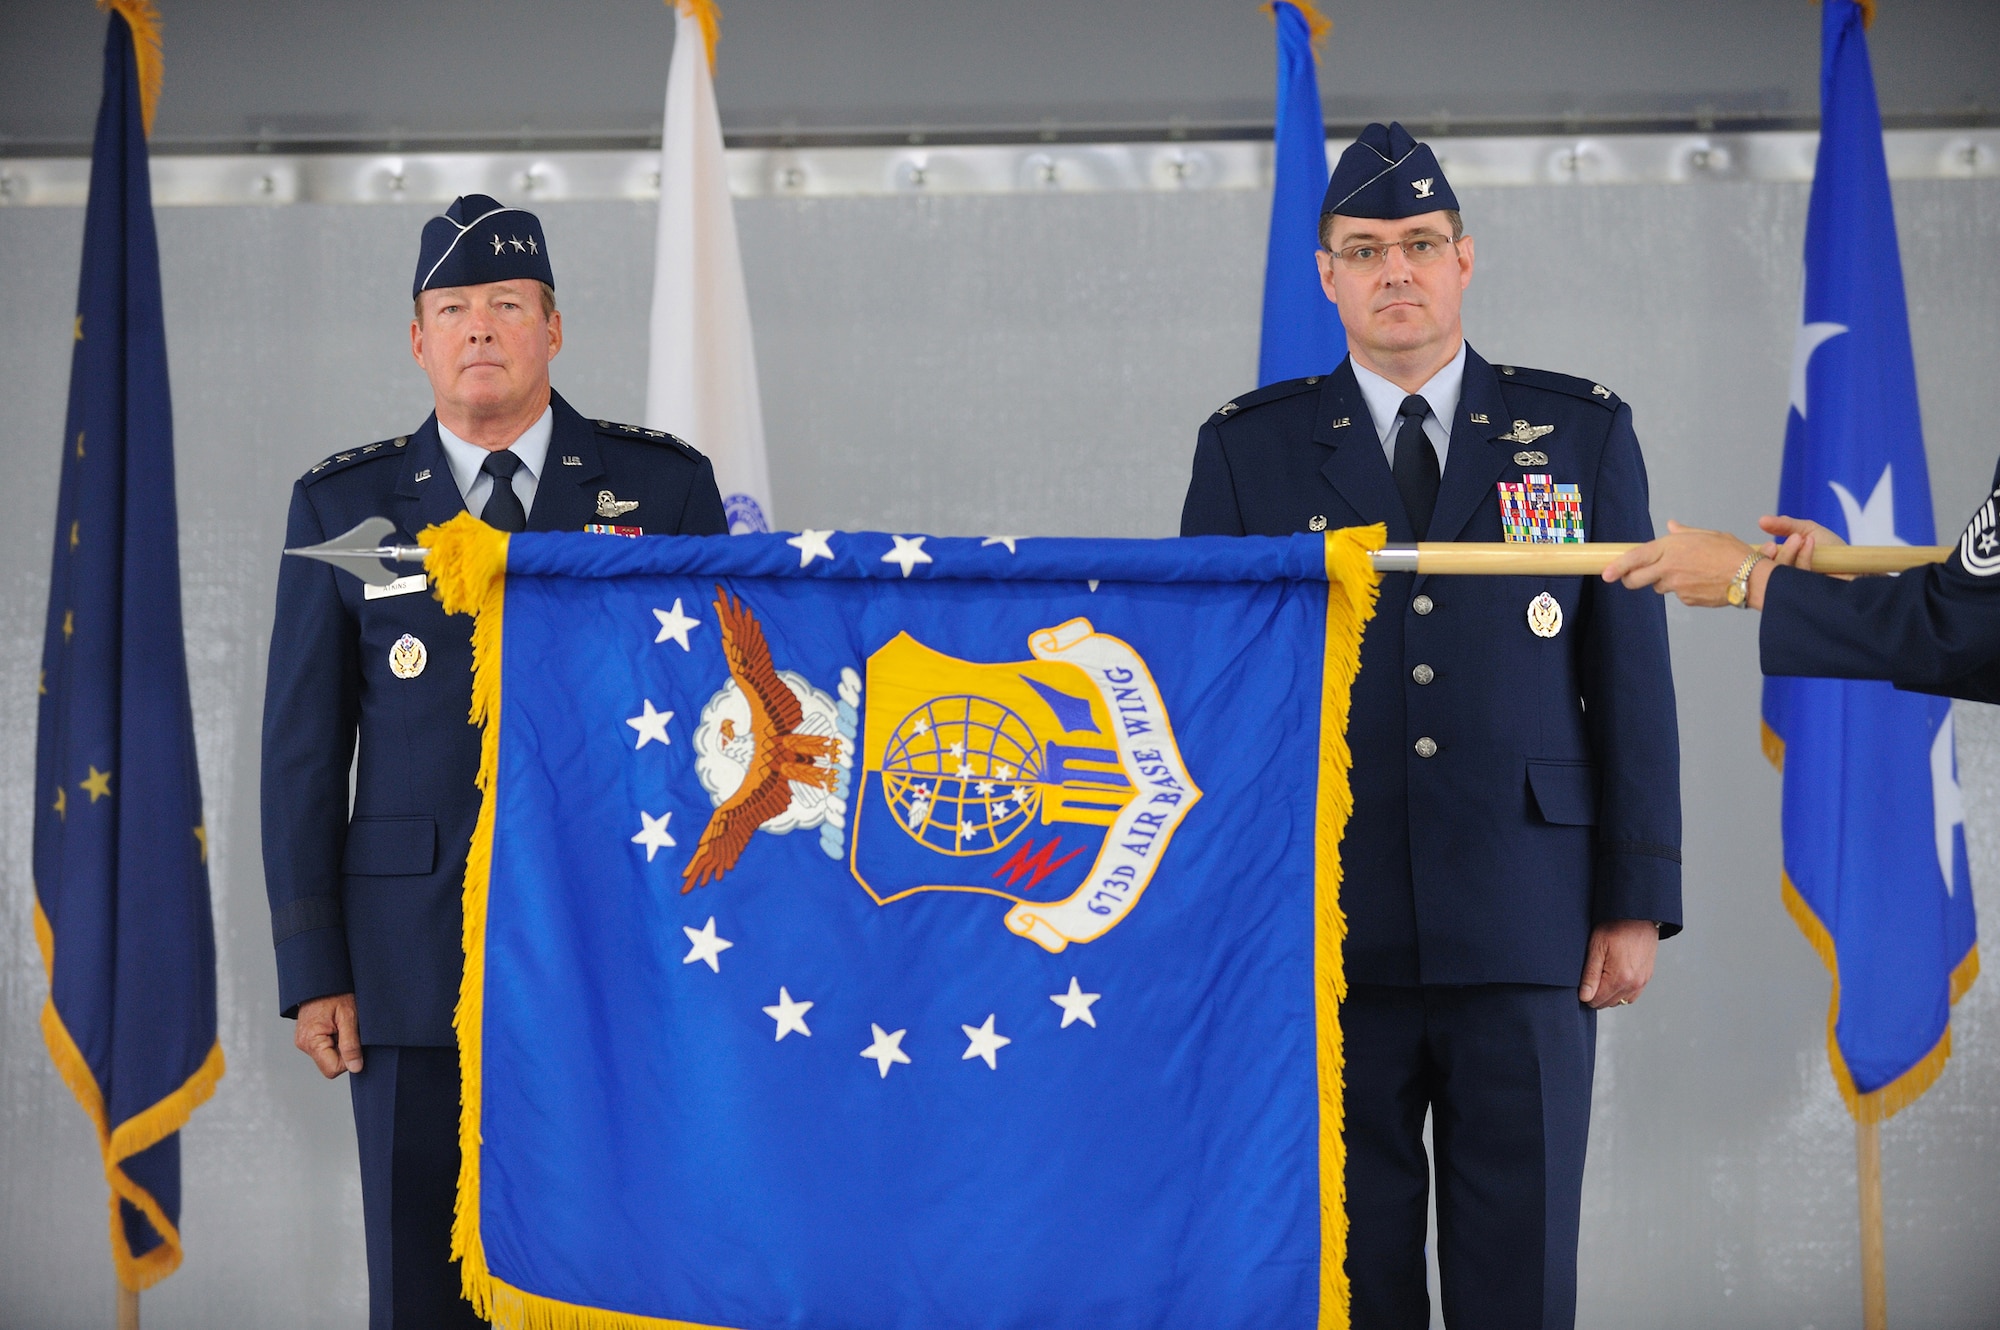 JOINT BASE ELMENDORF-RICHARDSON, Alaska -- Lt .Gen. Dana  T. Atkins, commander Alaskan Command, and Col. Robert D. Evans, commander 673d Air Base Wing, stand-by as the 673d Air Base Wing (673d ABW) guidon is unfurled during the unit's activation ceremony July 30. The 673d ABW is the supporting unit for Joint Base Elmendorf-Richardson which is comprised of over 6,000 military, civilian and contractors from both Elmendorf Air Force Base and Fort Richardson Army Garrison near Anchorage, Alaska. (Air Force photo by Master Sgt. Jeremiah Erickson)